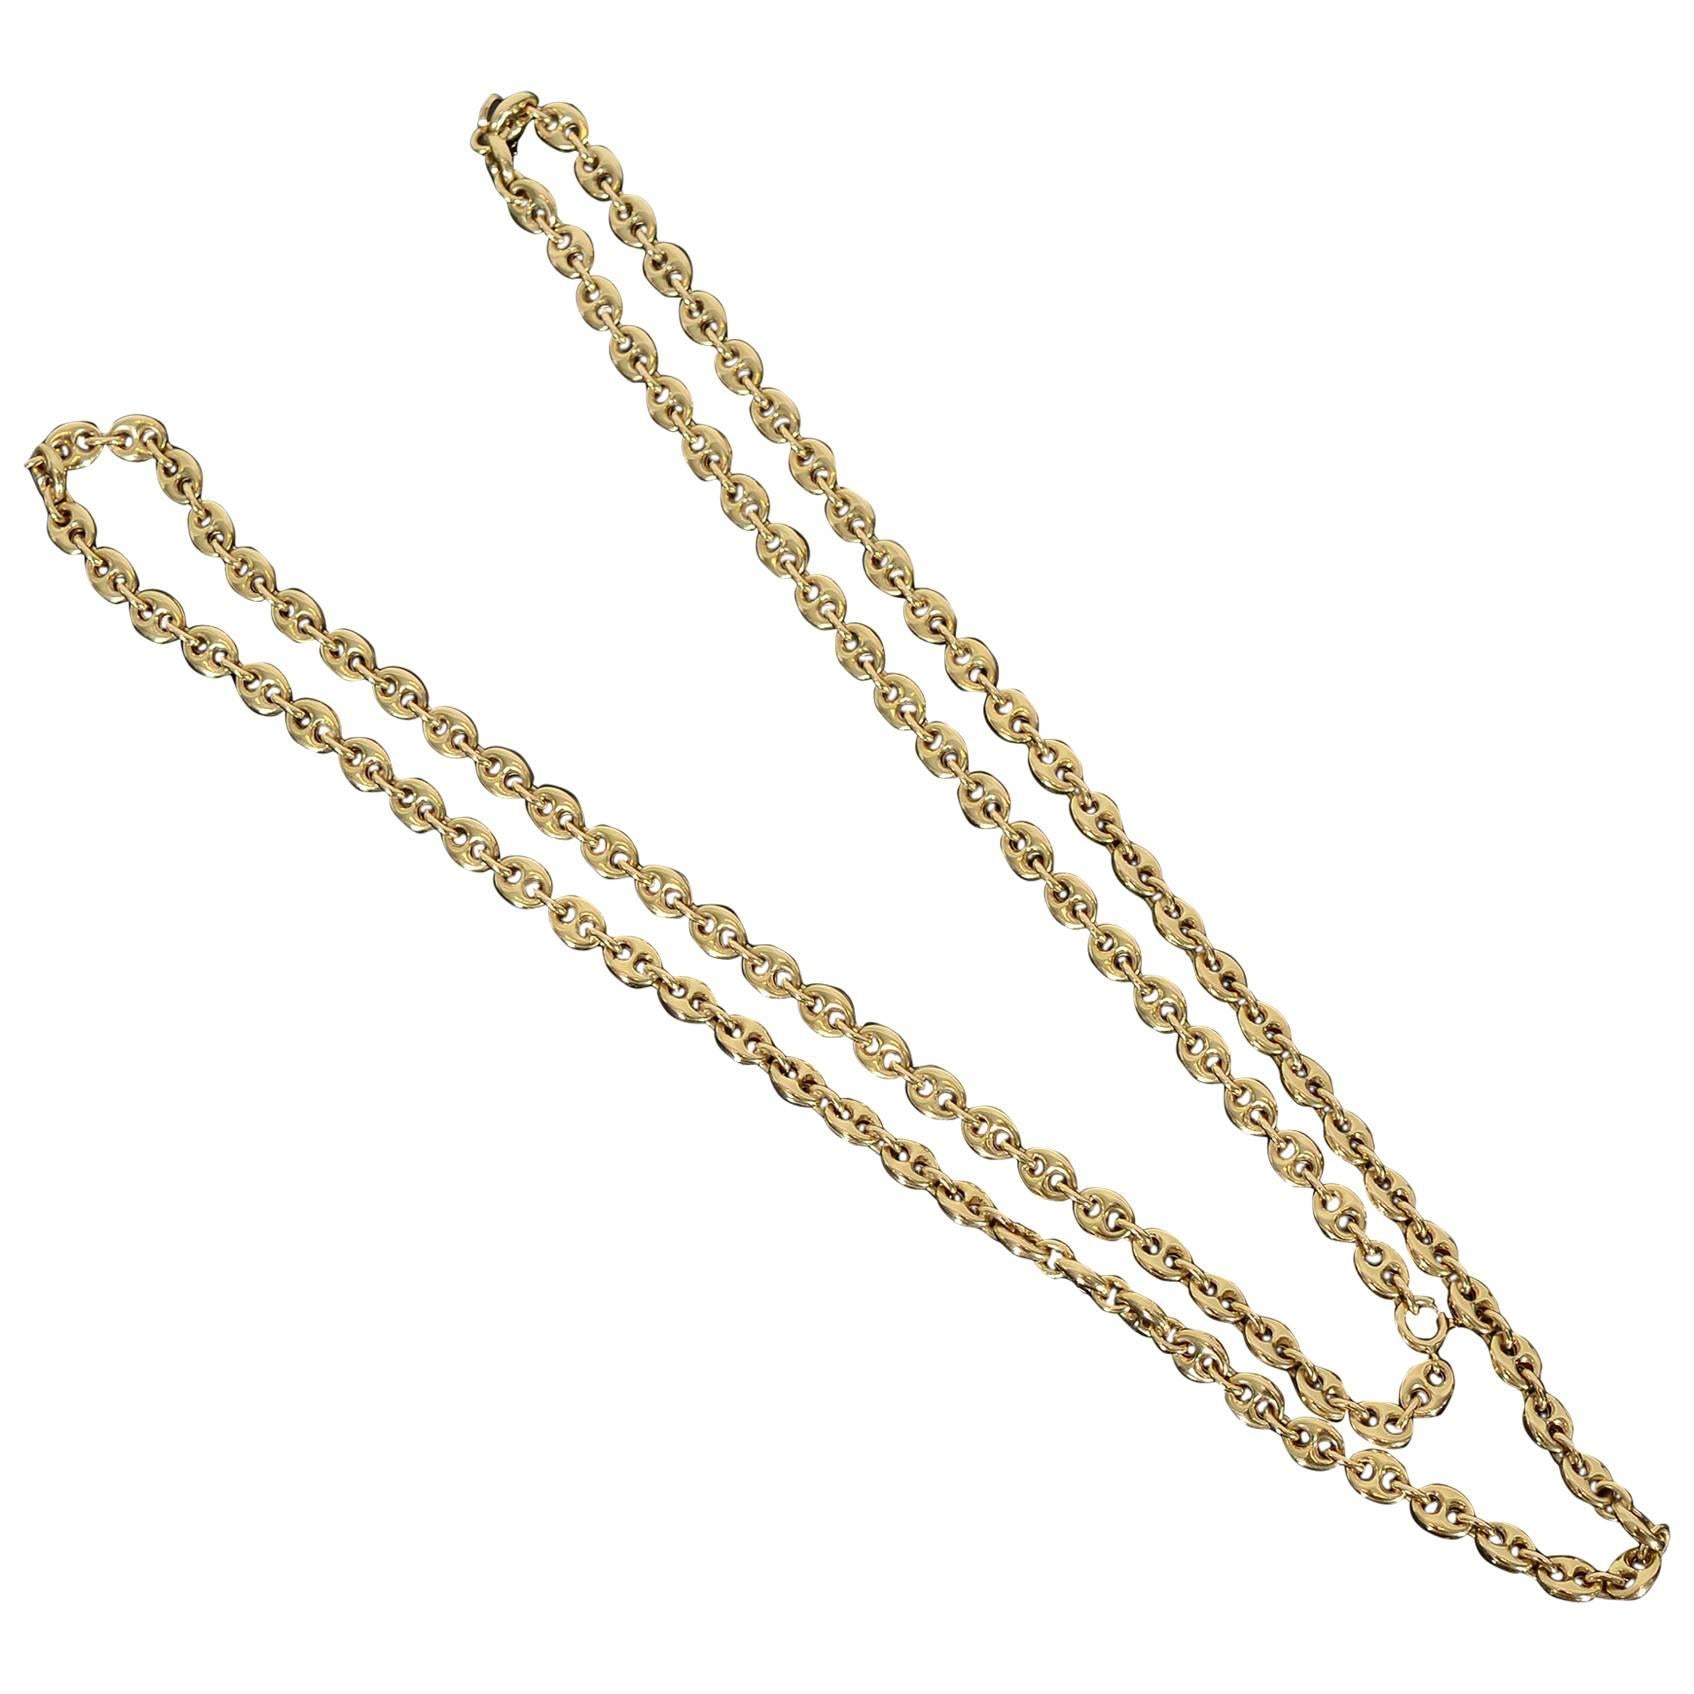 Gucci Long Gold Chain Link Necklace